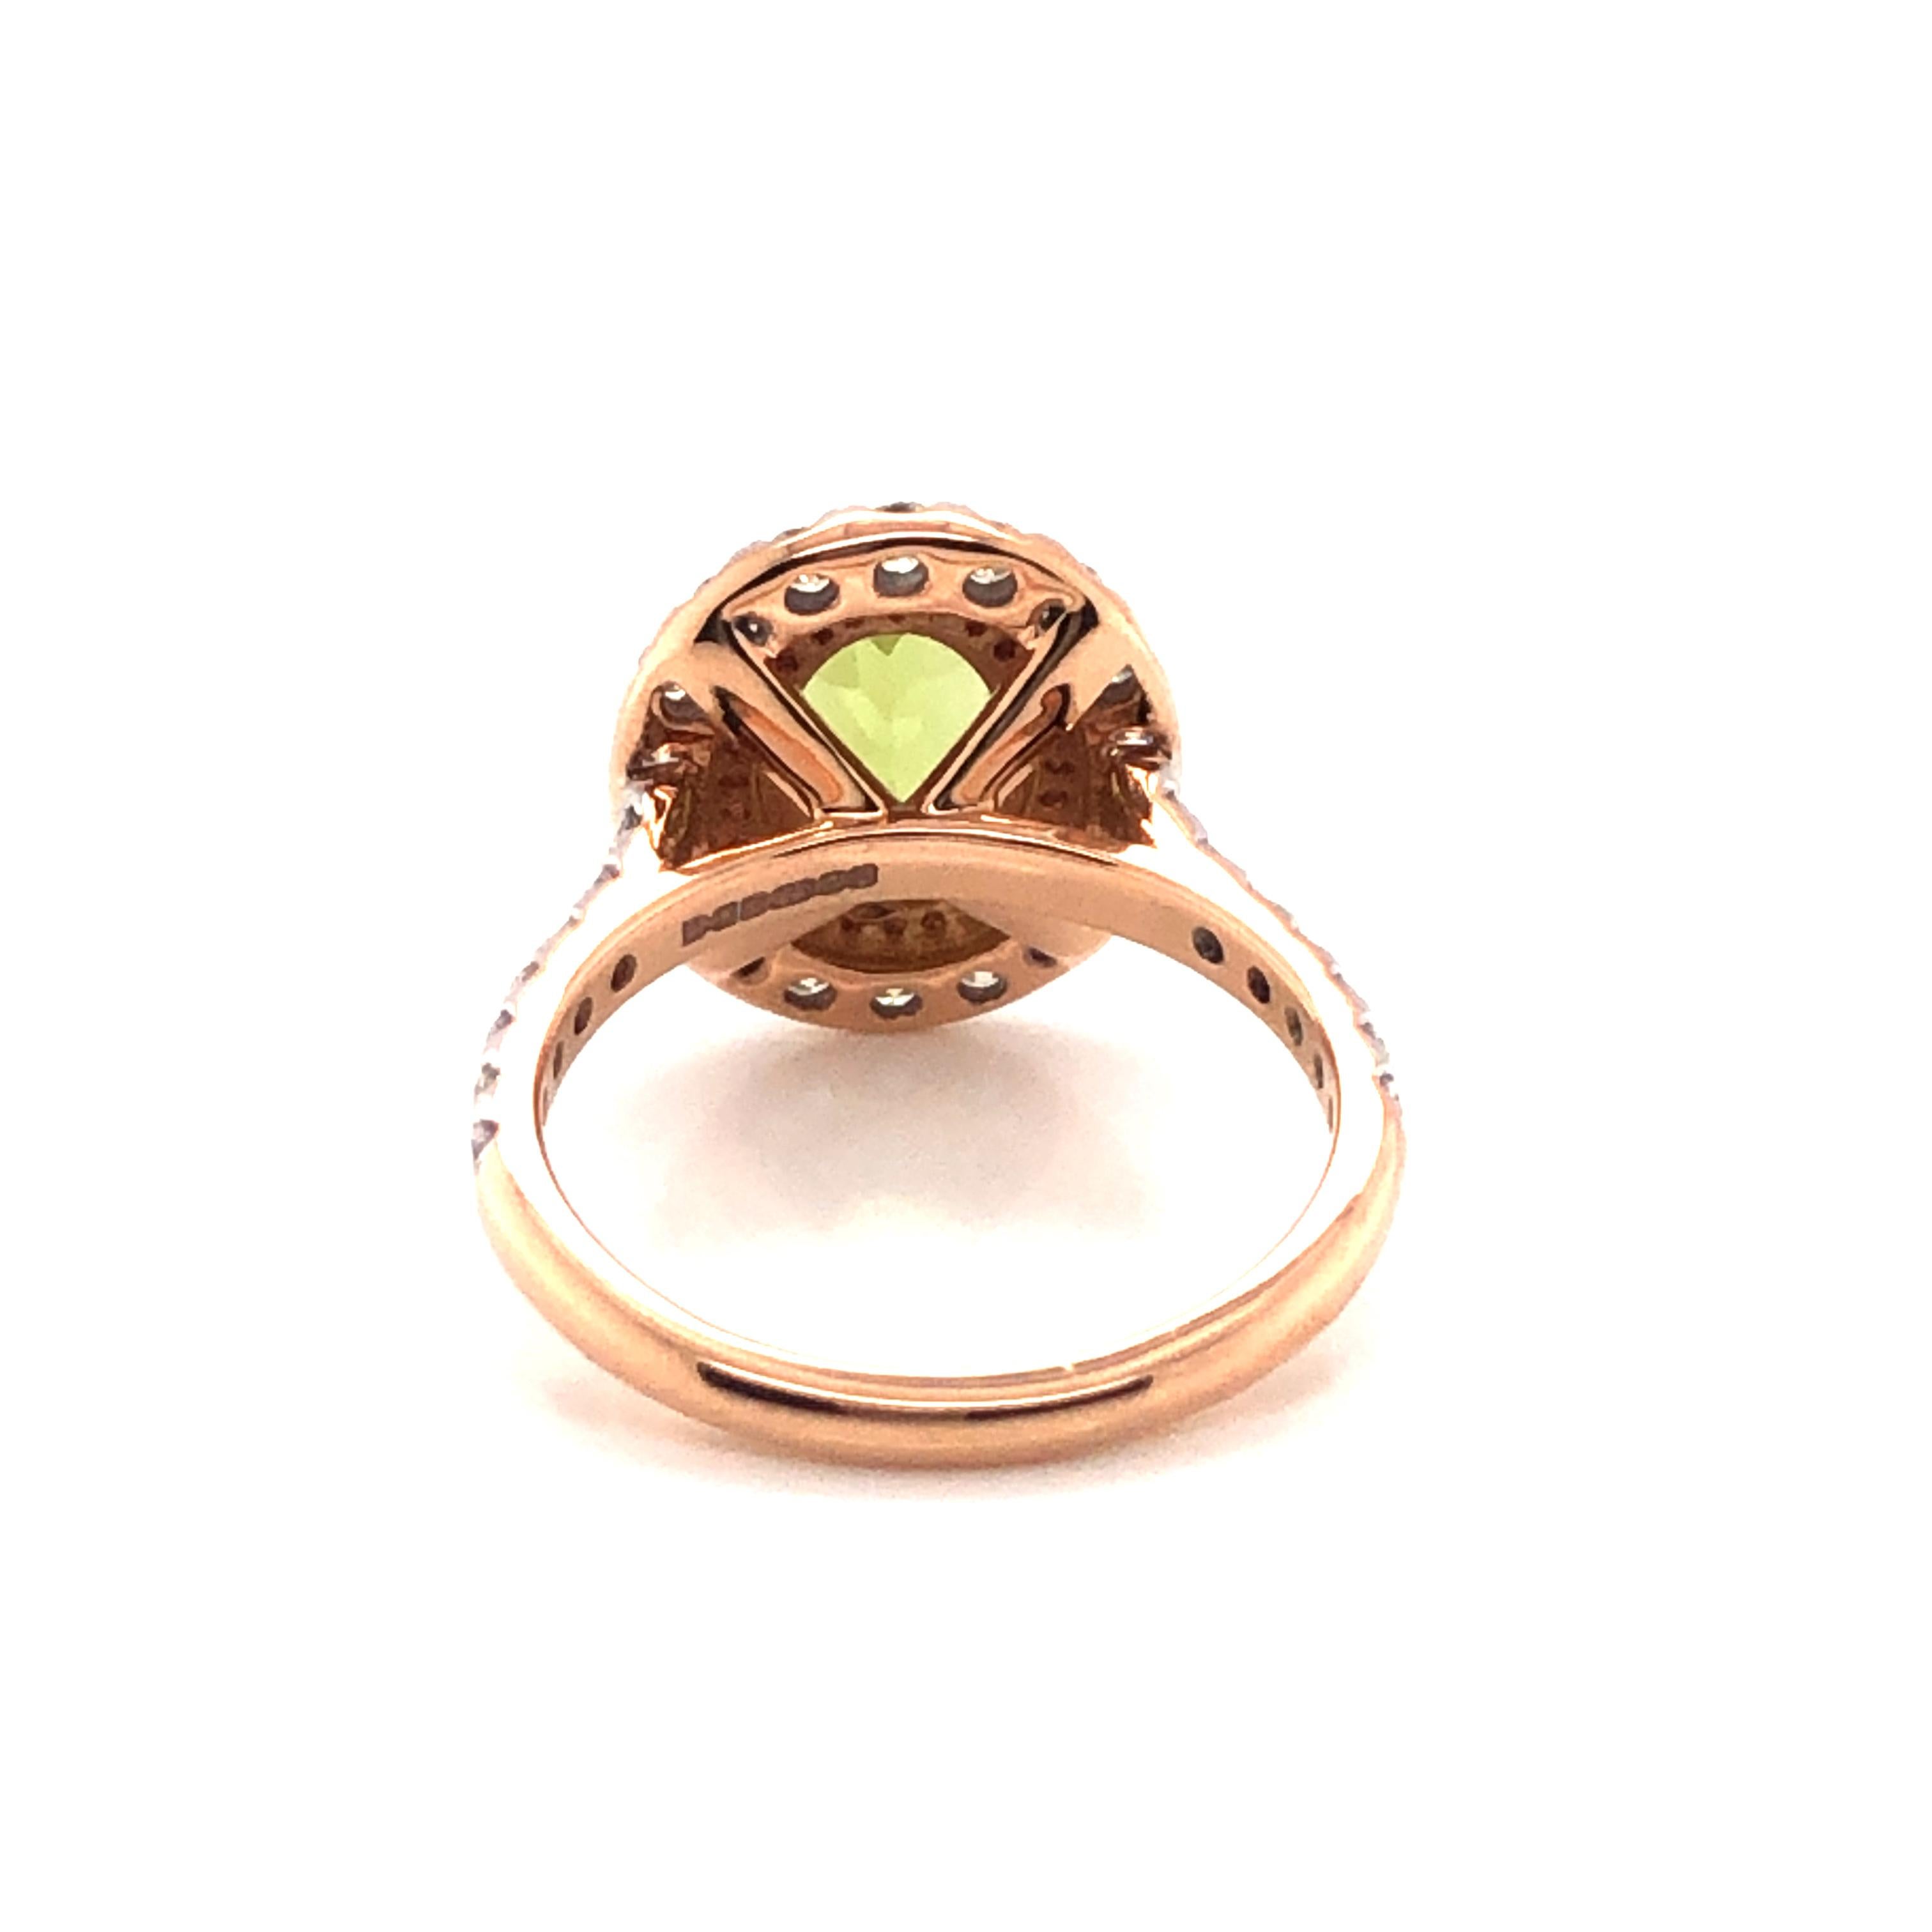 2.5 Carat Green Peridot Pink Sapphire Diamond Engagement Cocktail 18KT Ring In New Condition For Sale In London, GB